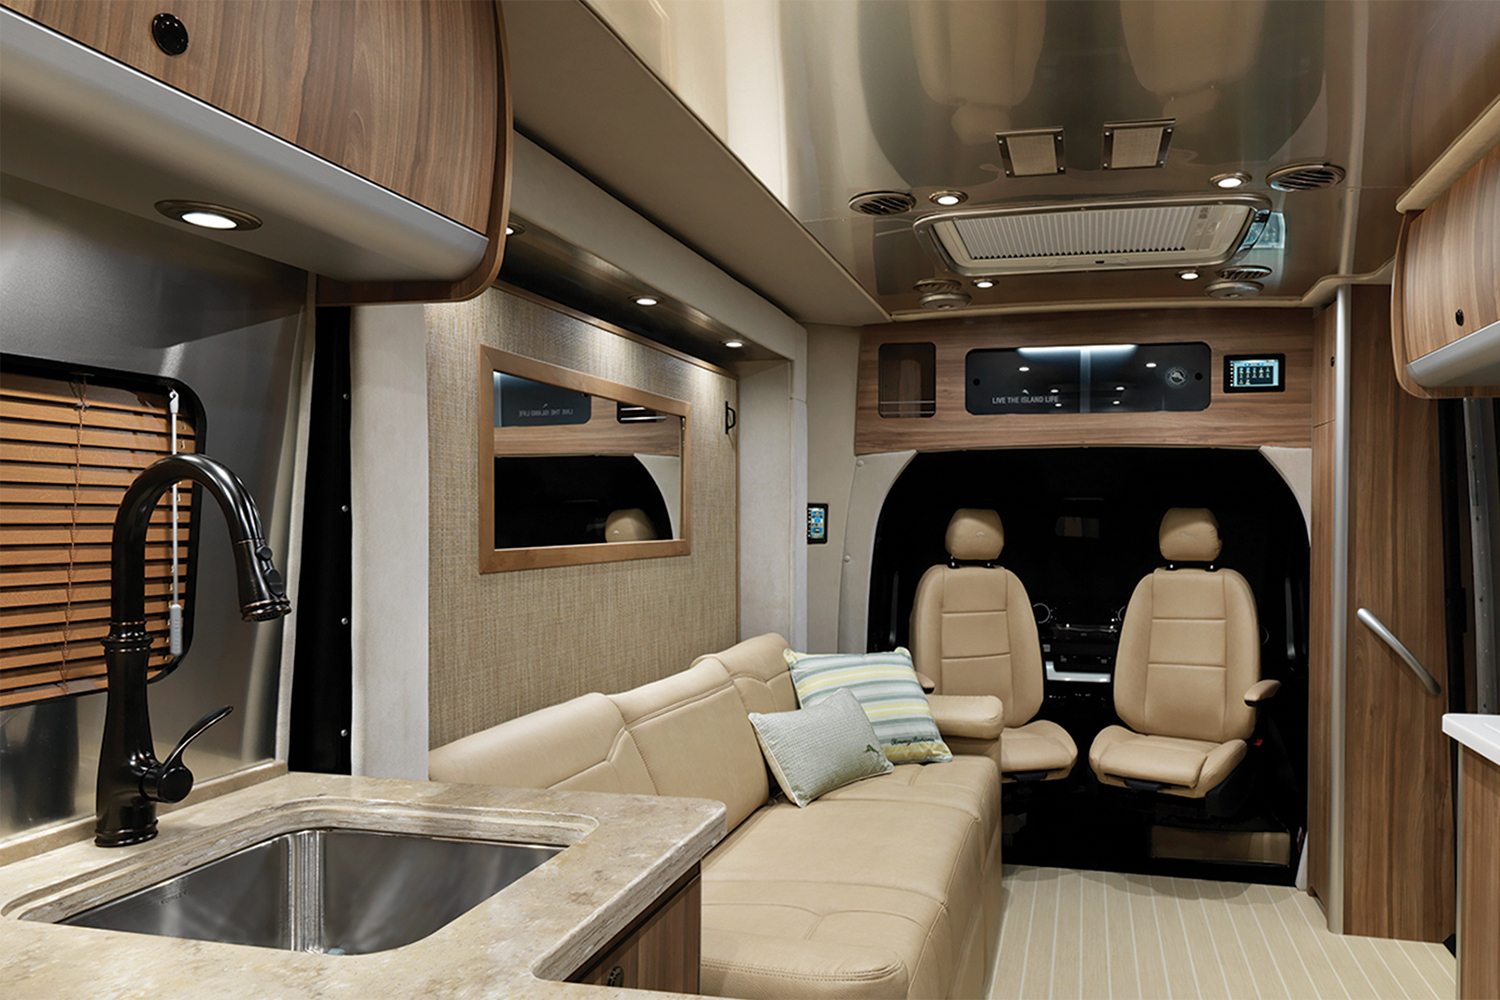 The Airstream Atlas motorhome with a Tommy Bahama interior pack